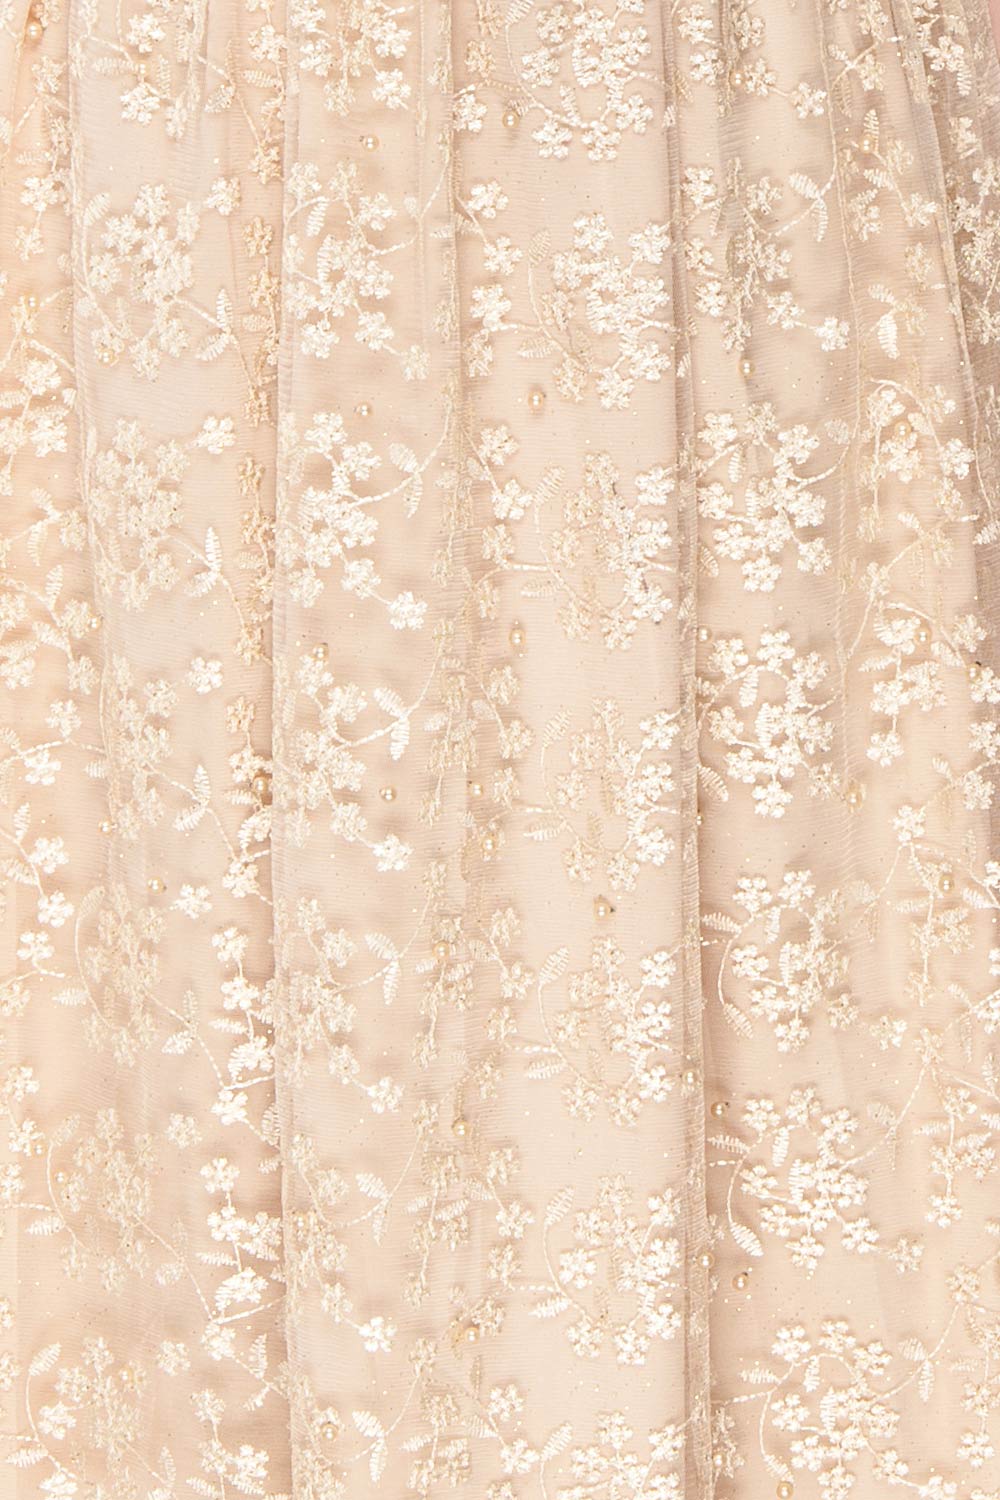 Namiko | Beige Embroidered Gown